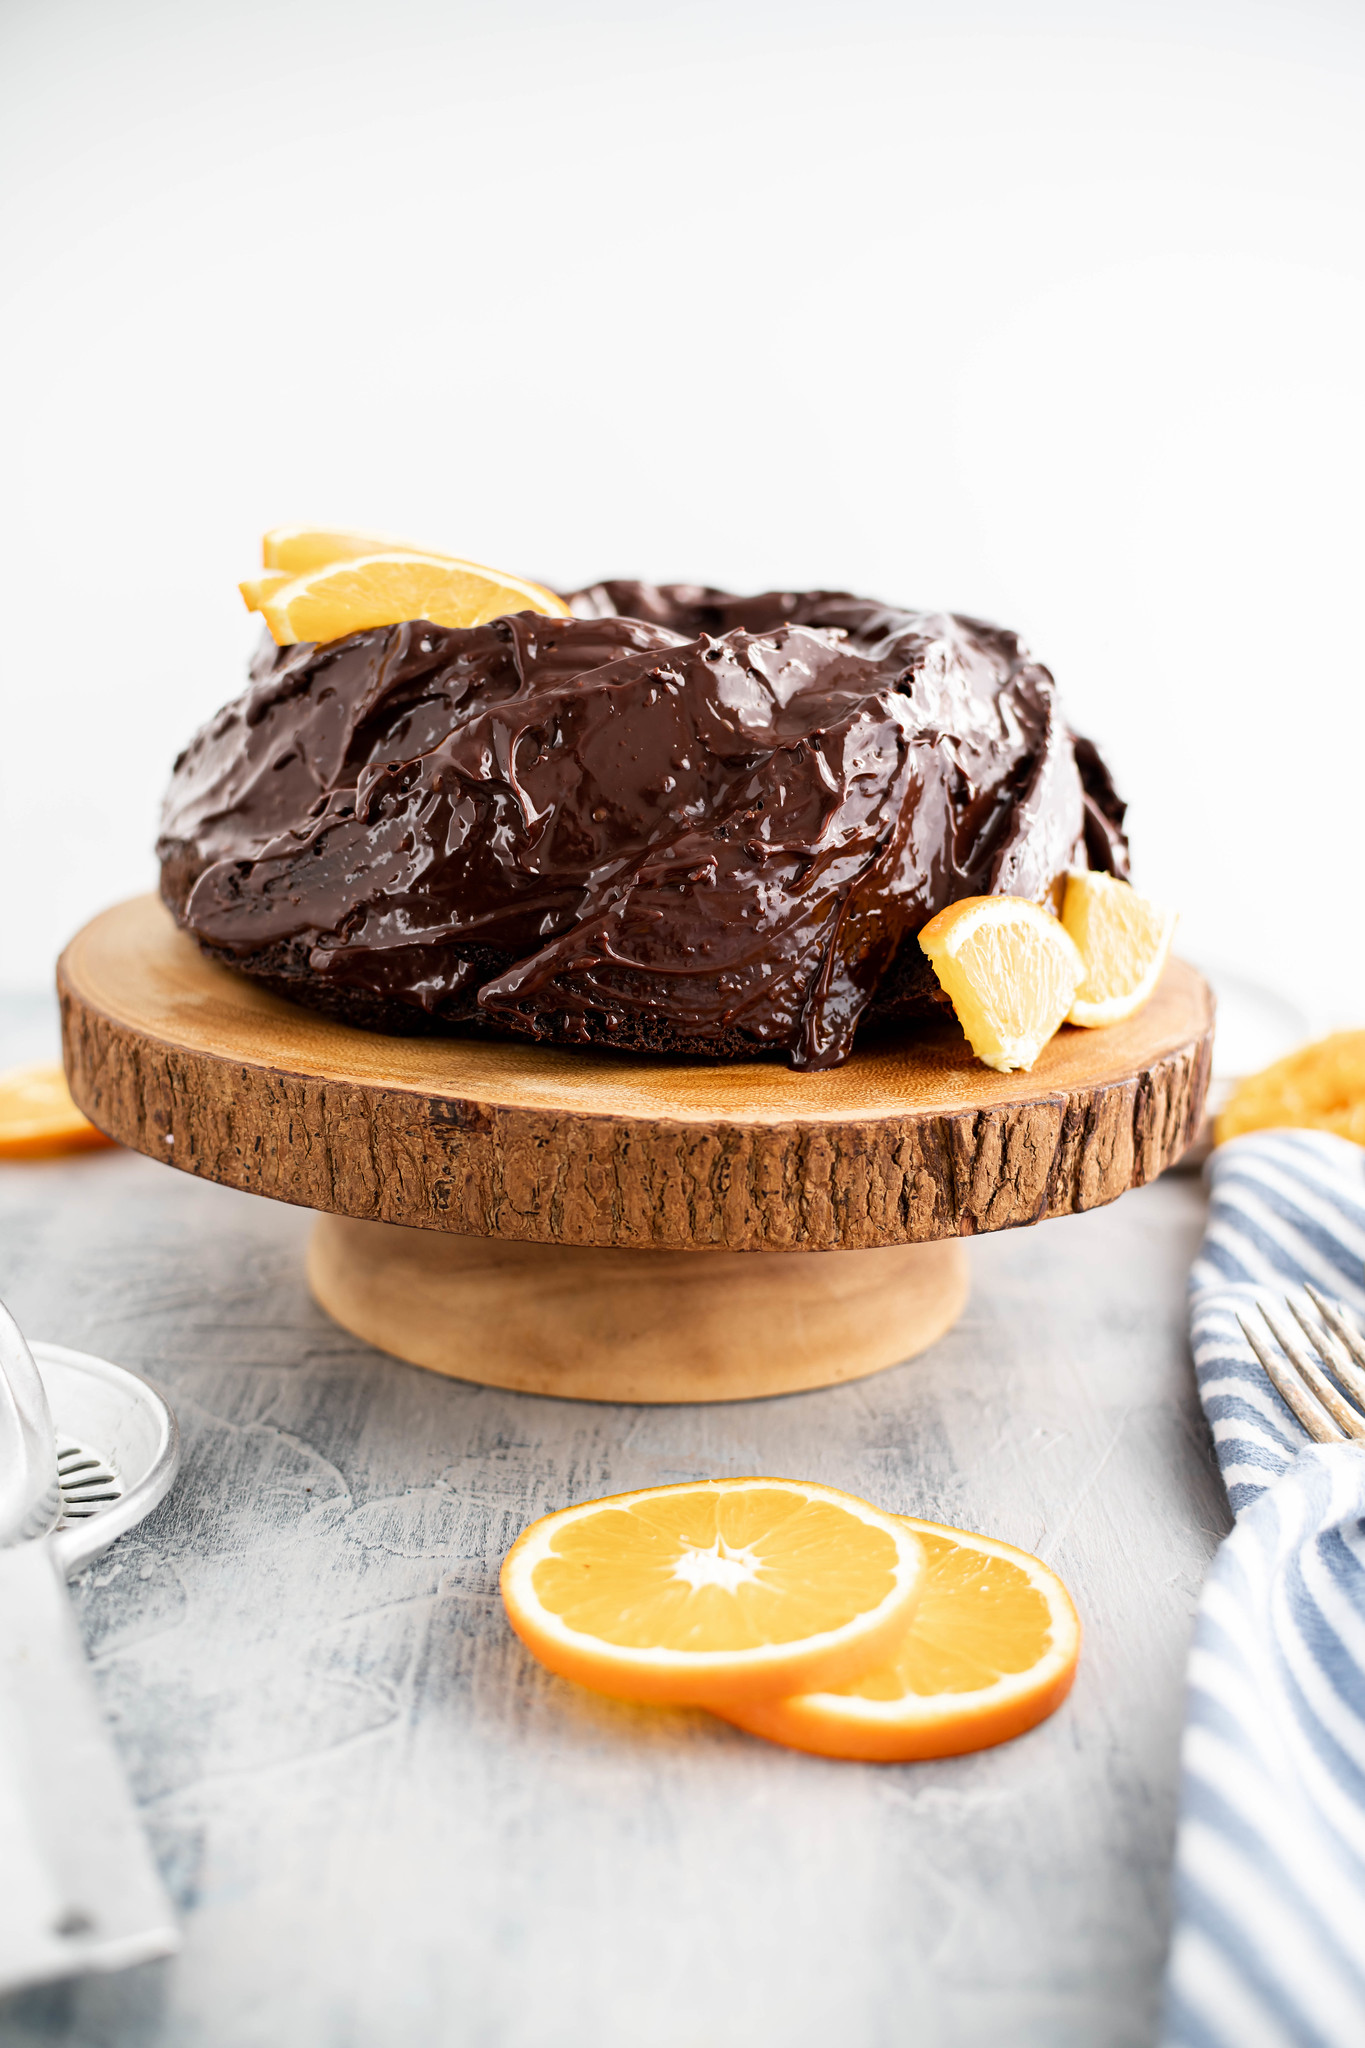 Photo of orange chocolate cake on a wooden cake stand surrounded by slices of oranges.